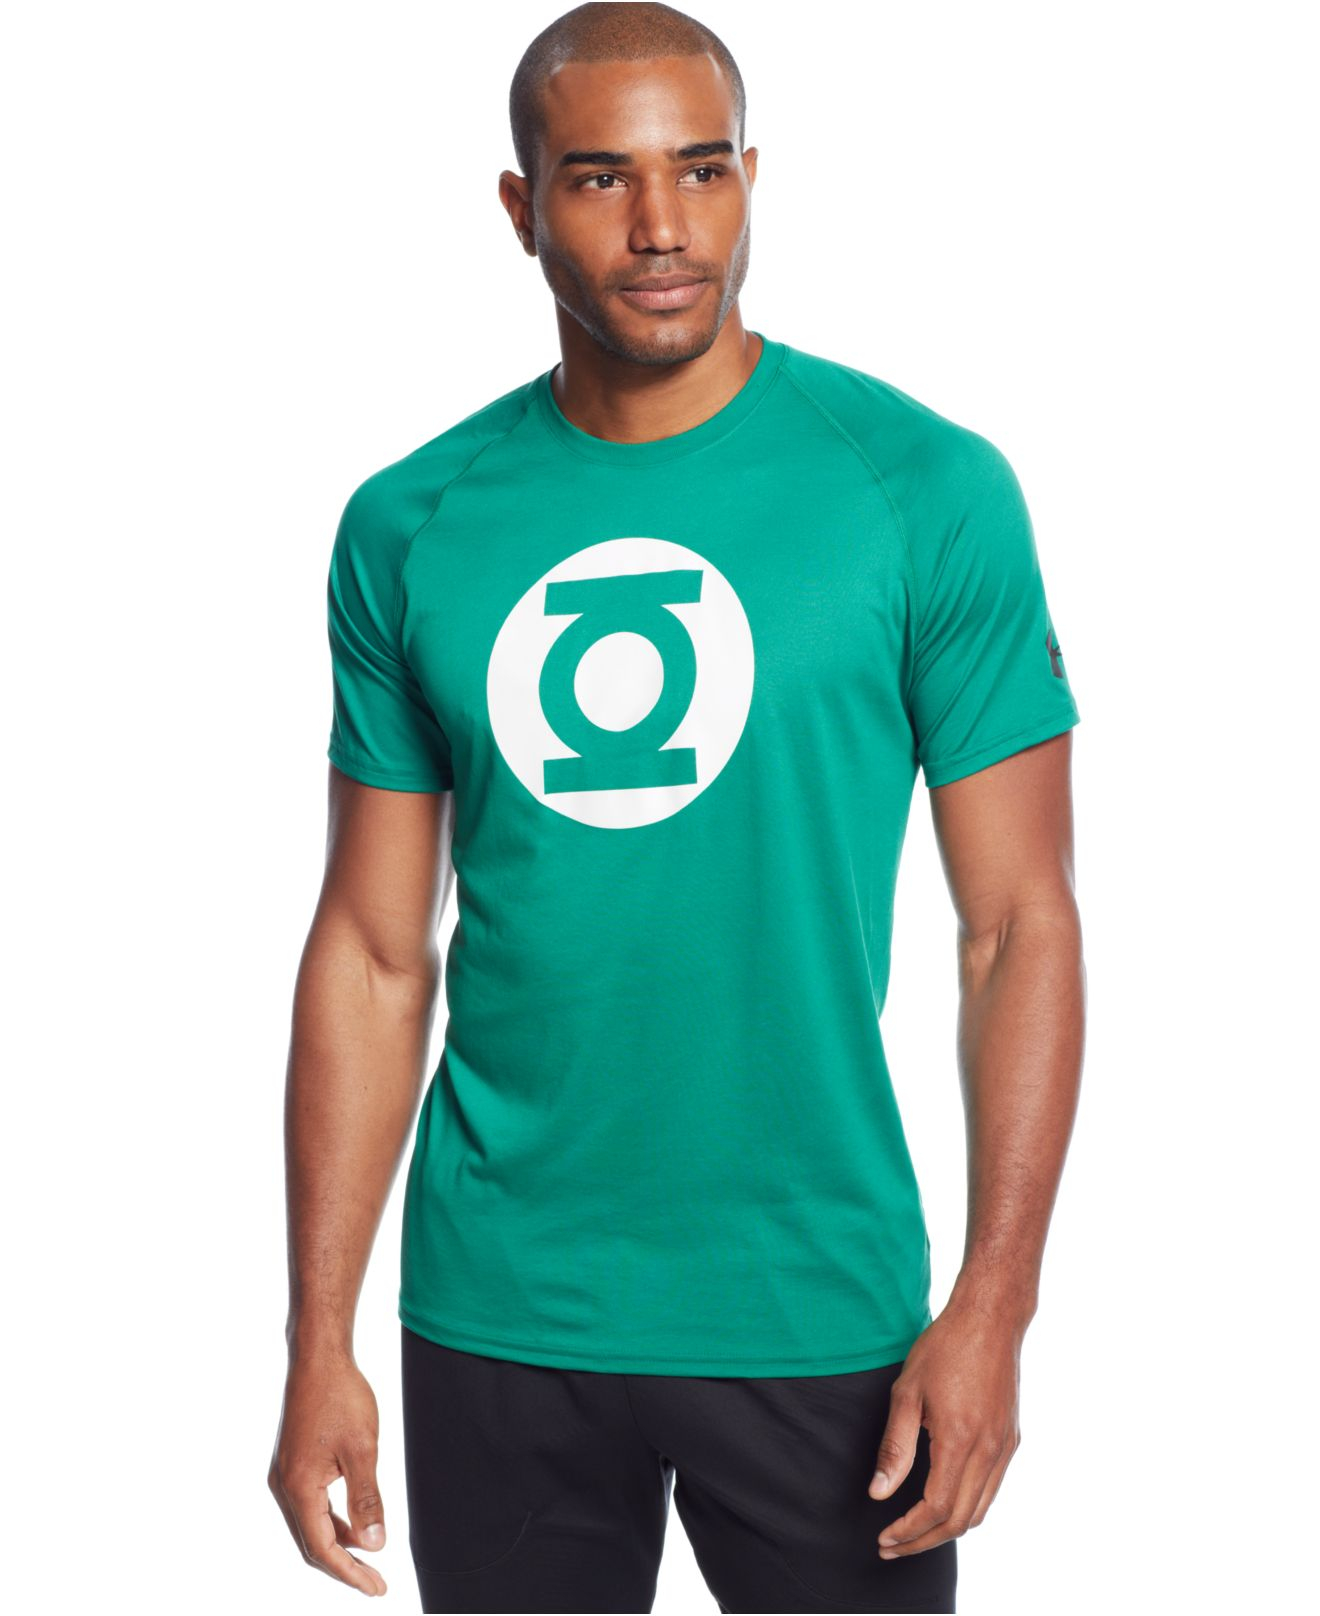 Green Lantern Surrounded By Death Premium Adult Slim Fit T-Shirt 